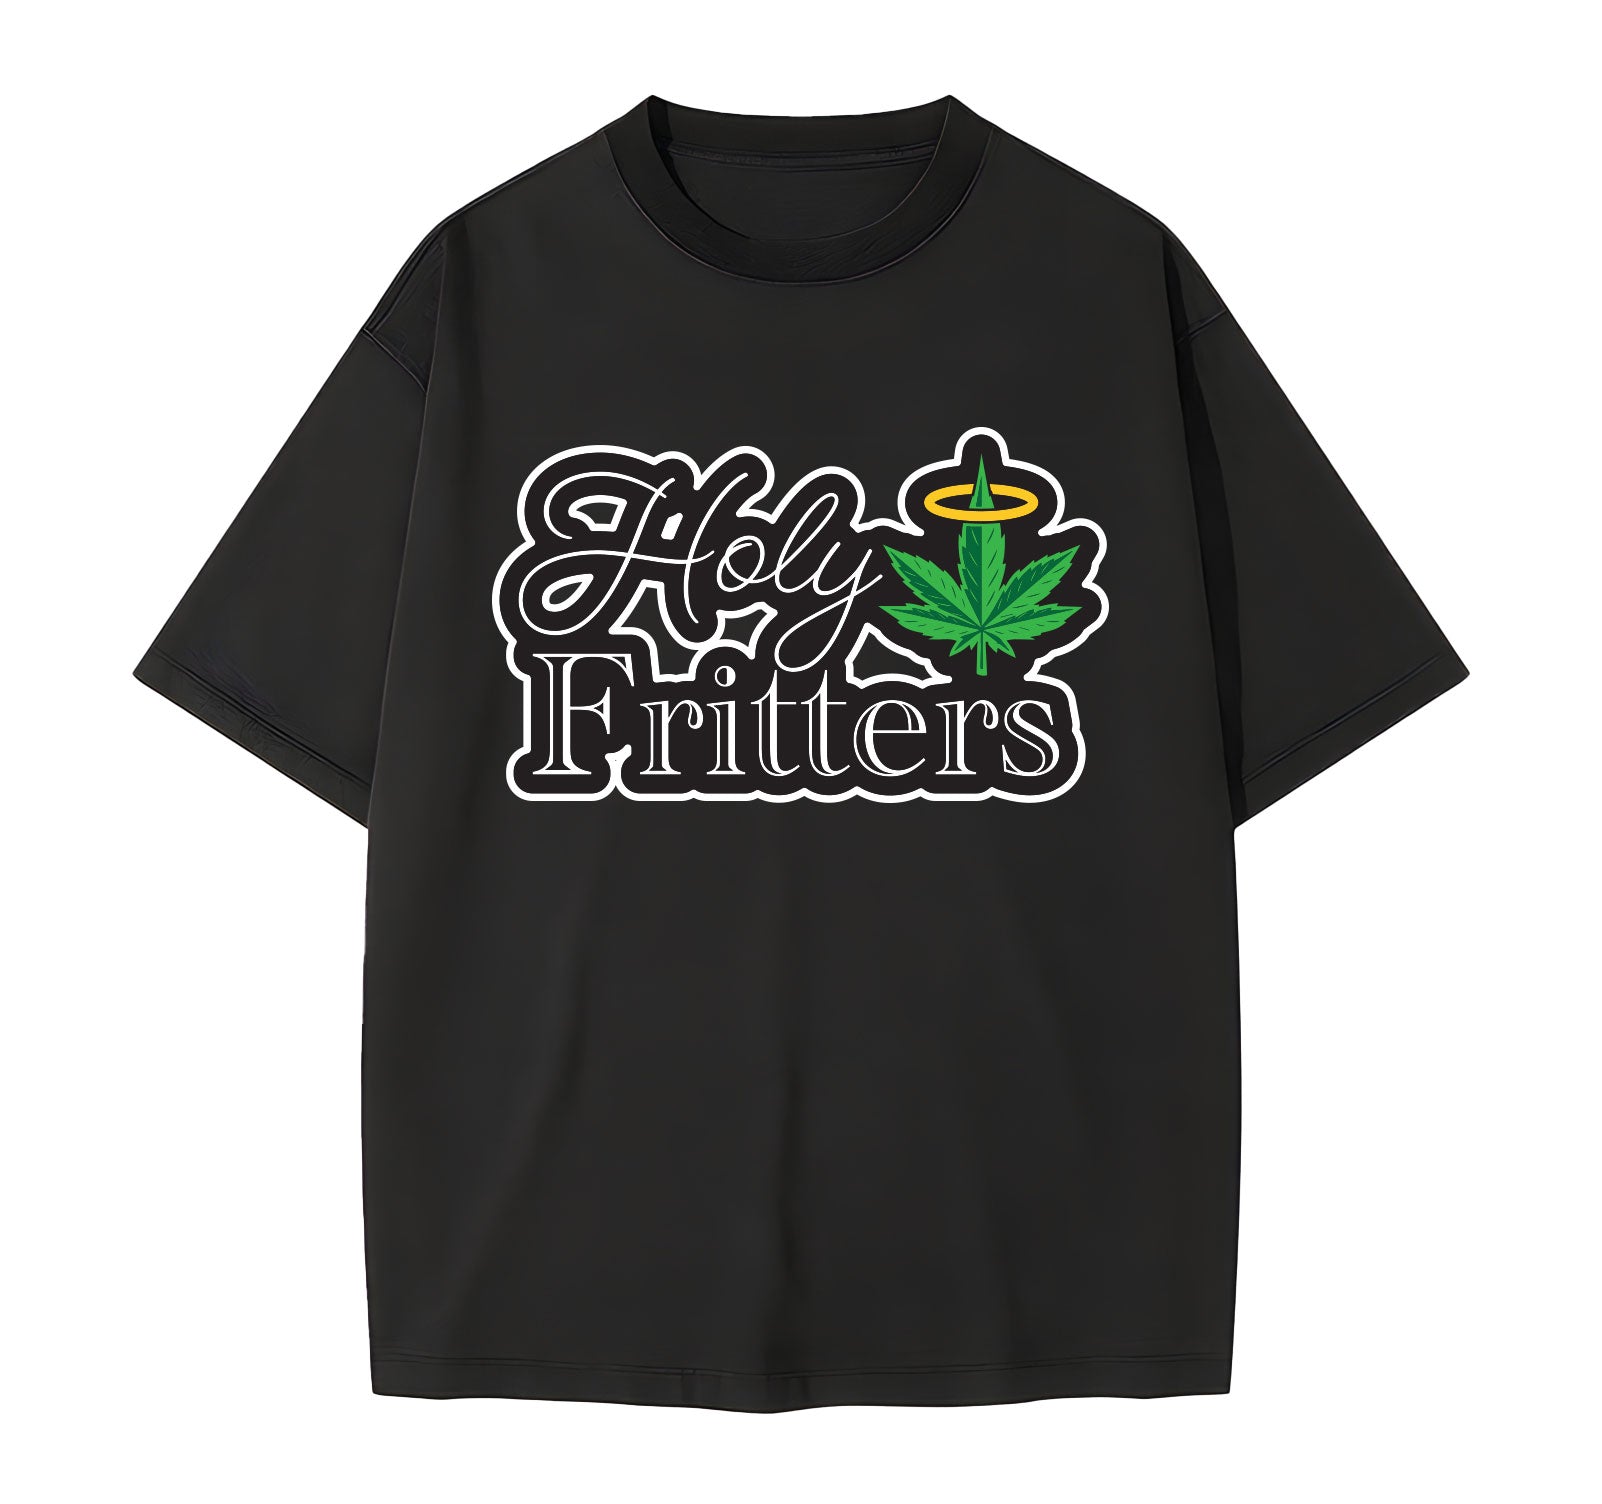 Holy Fritters Tee